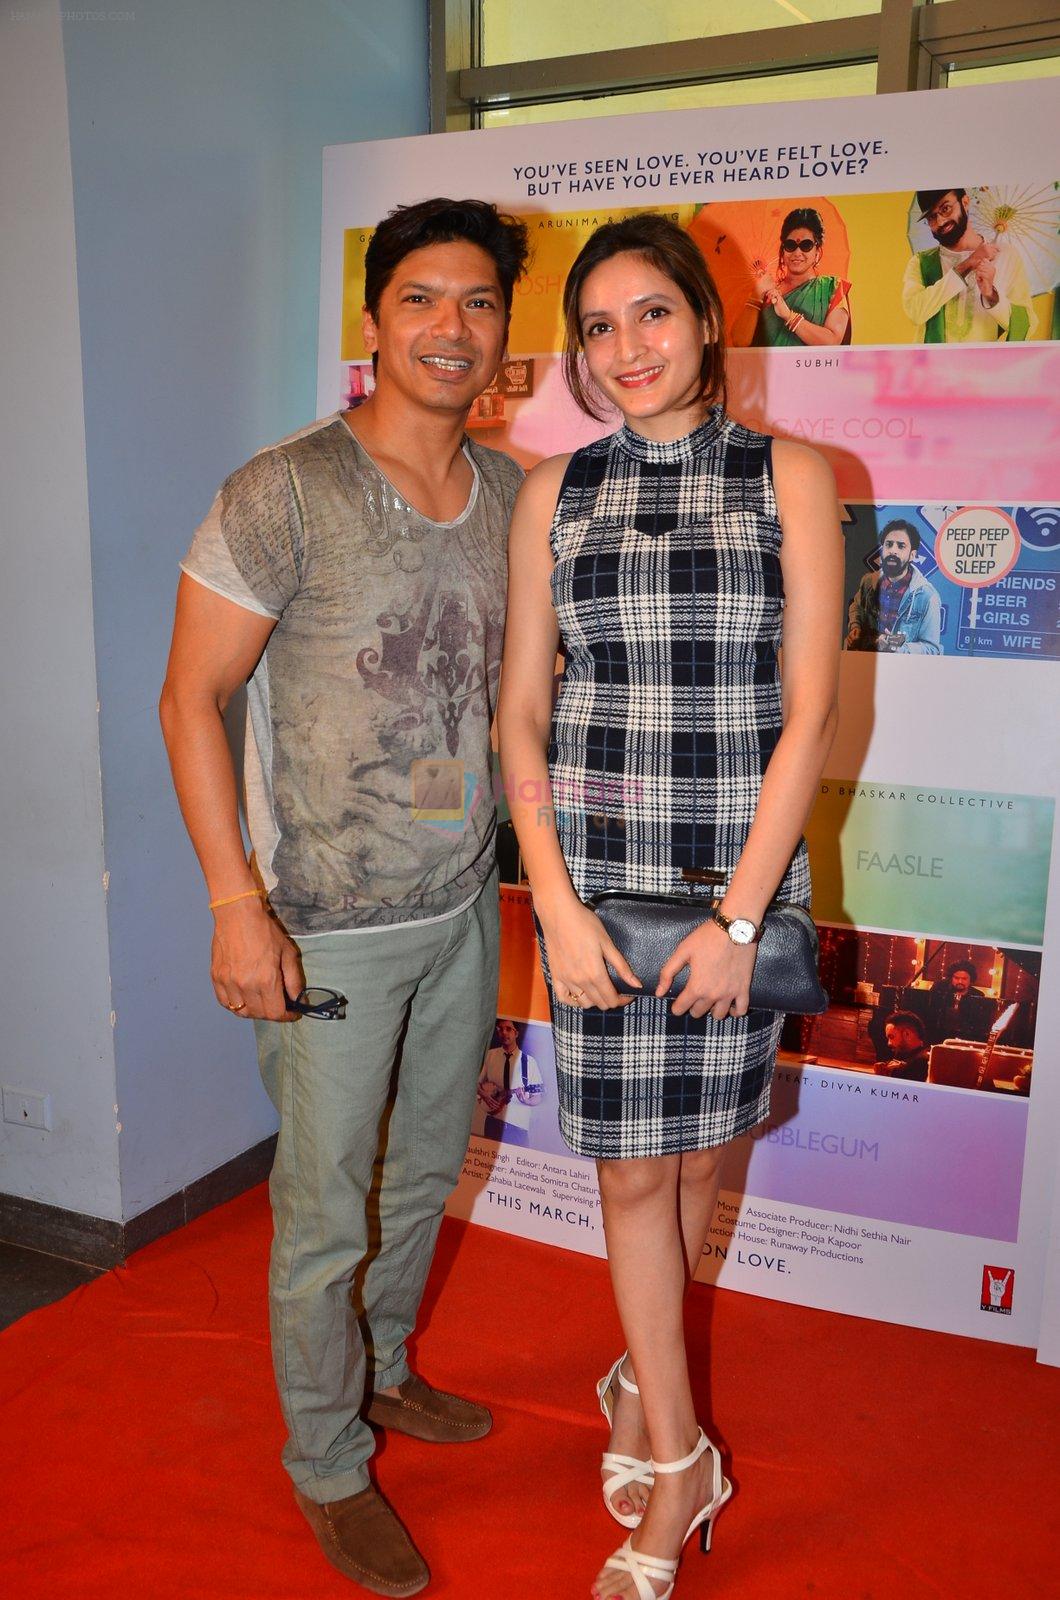 Shaan at the launch of Love Shots film launch on 7th March 2016